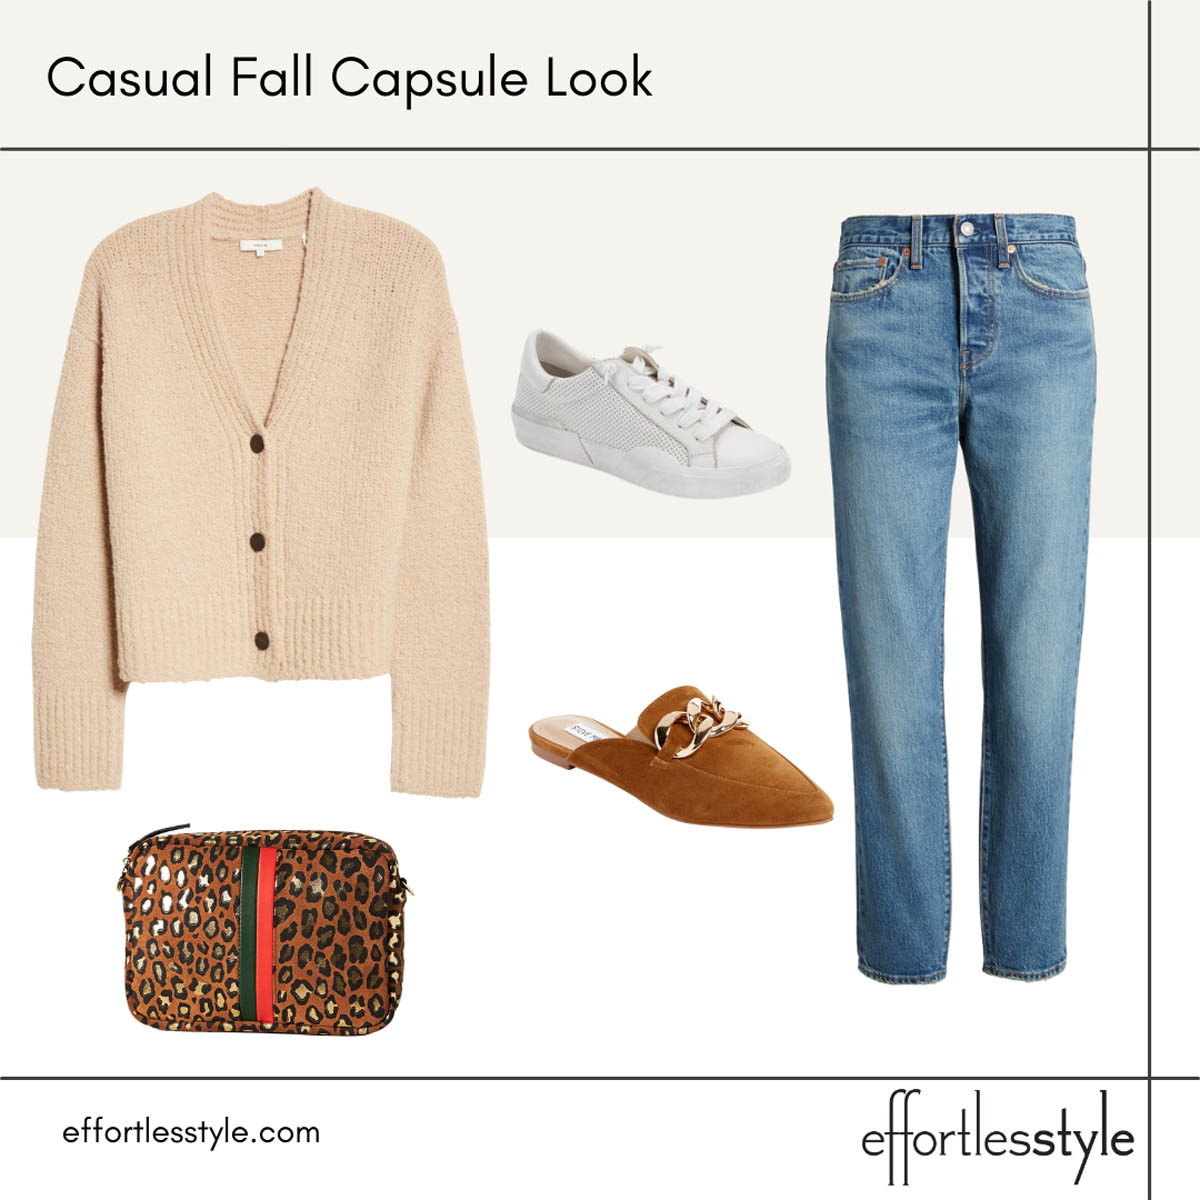 How to Wear Wool Blend Cardigan & Jeans Look for fall Capsule Wardrobe